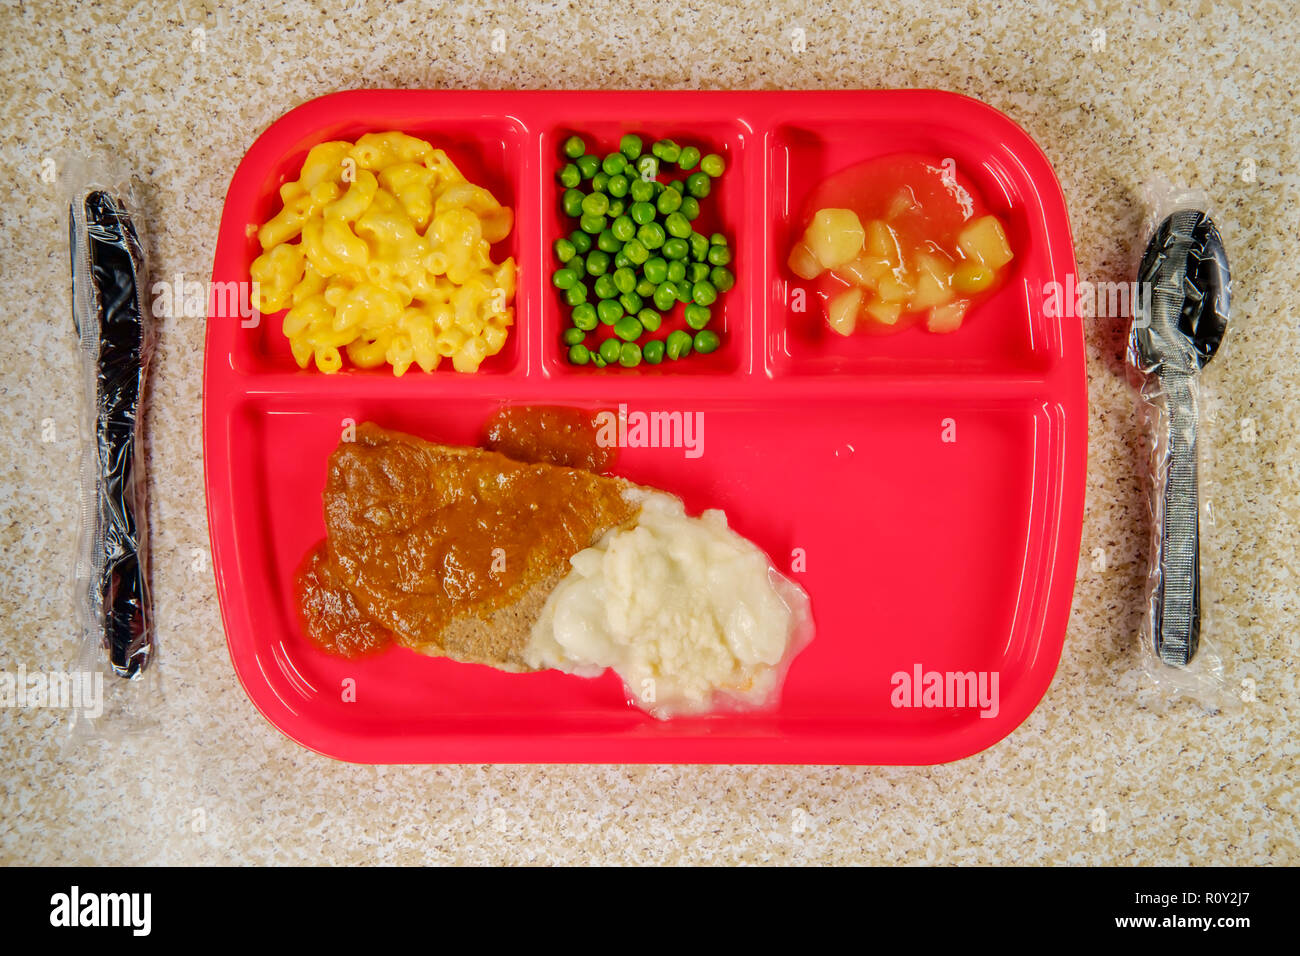 Grade school lunch salisbury steak on tray with peas macaroni and cheese and apple sauce Stock Photo